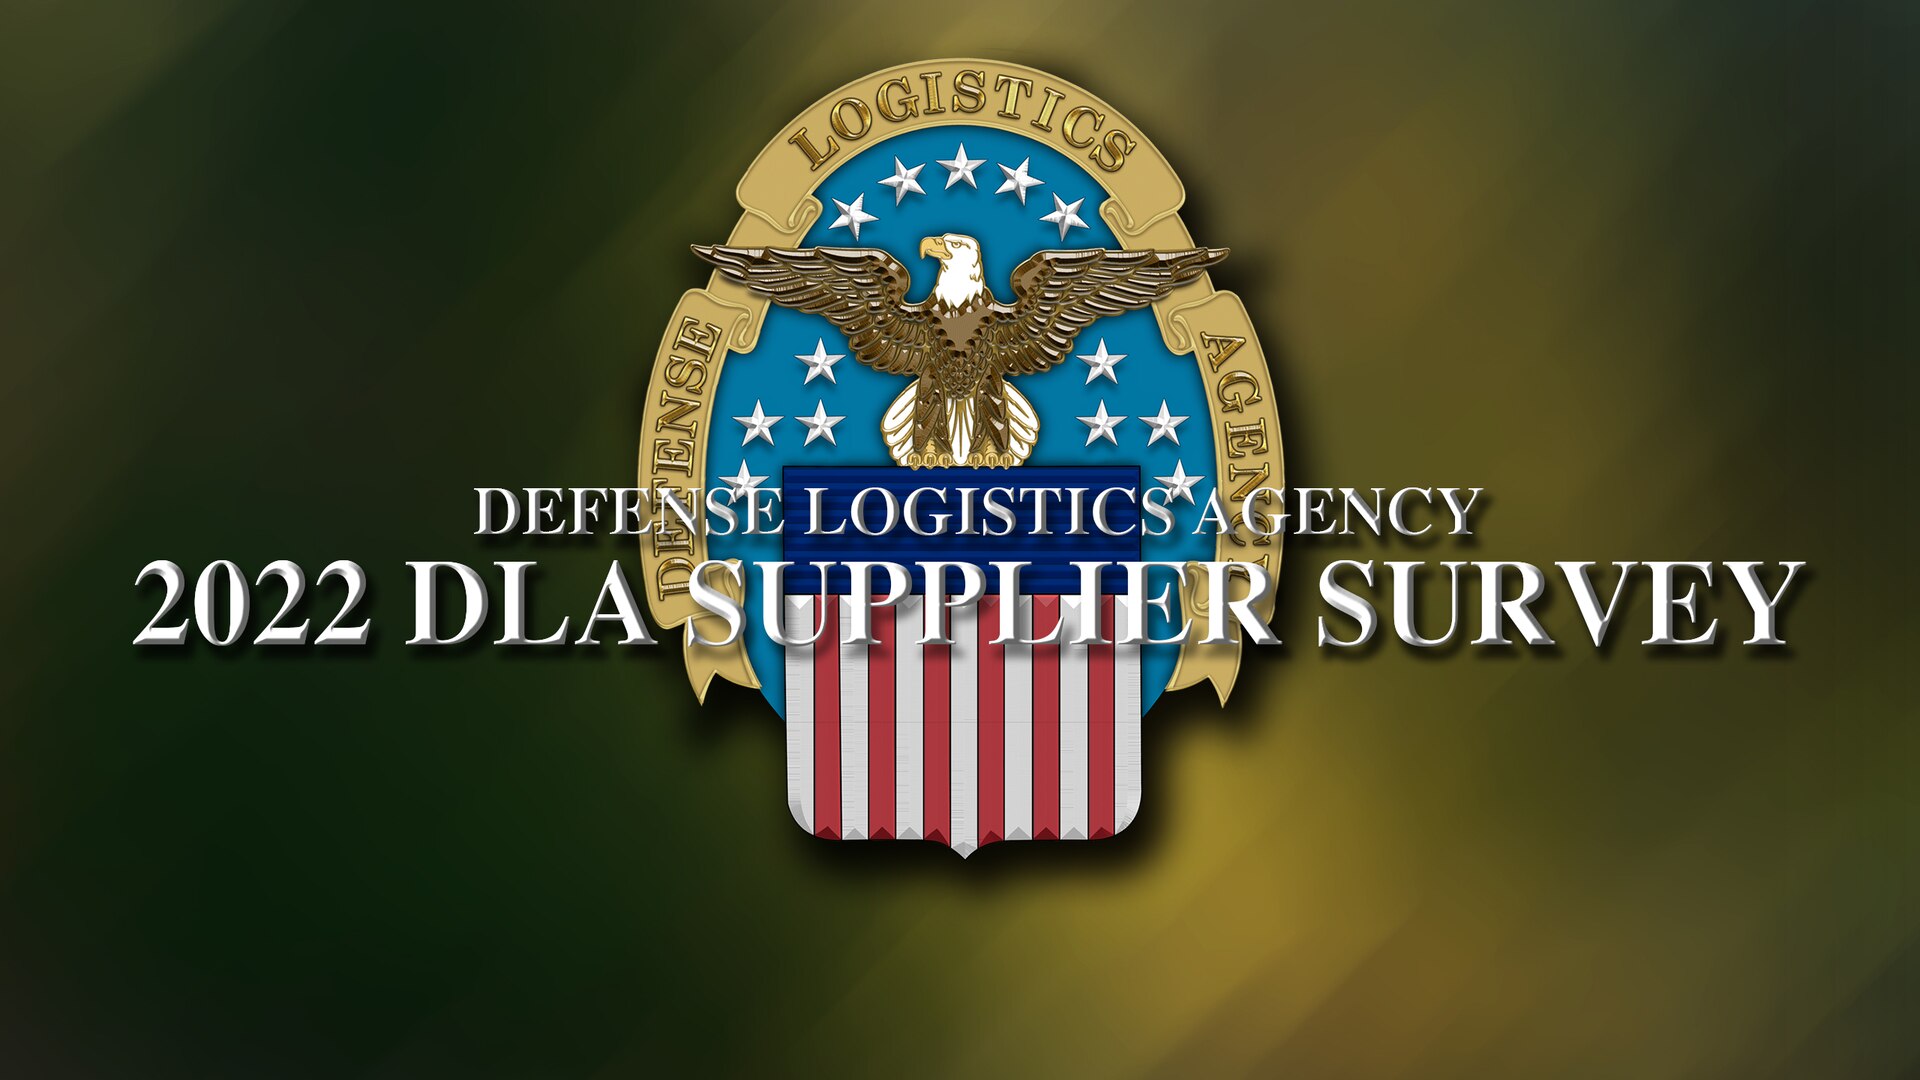 Text imposed over the DLA logo